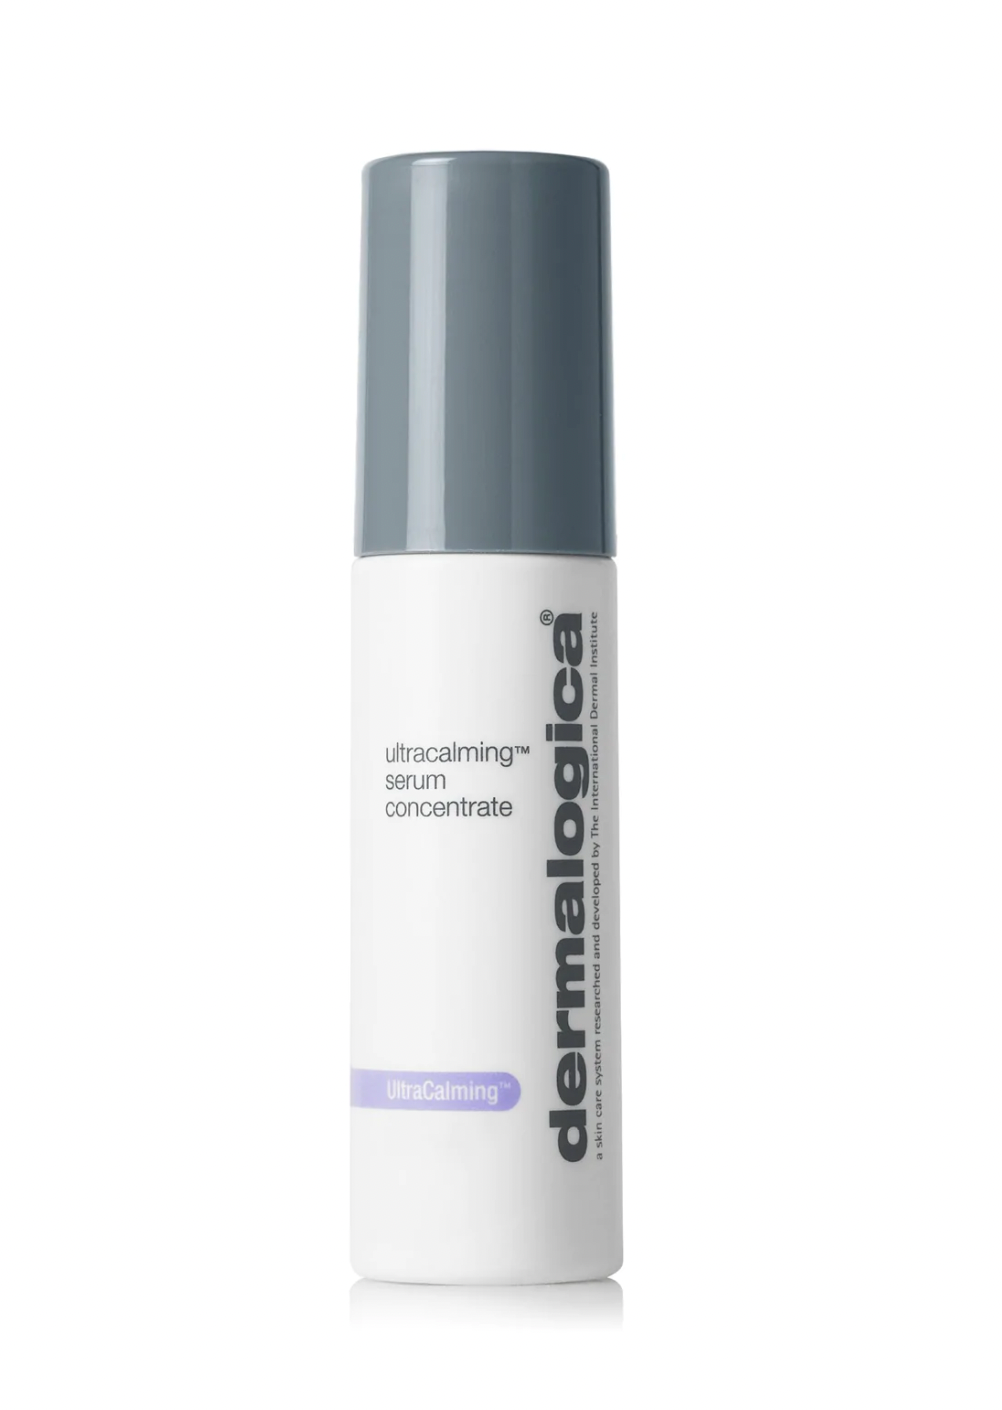 DL Ultracalming Serum Concentrate